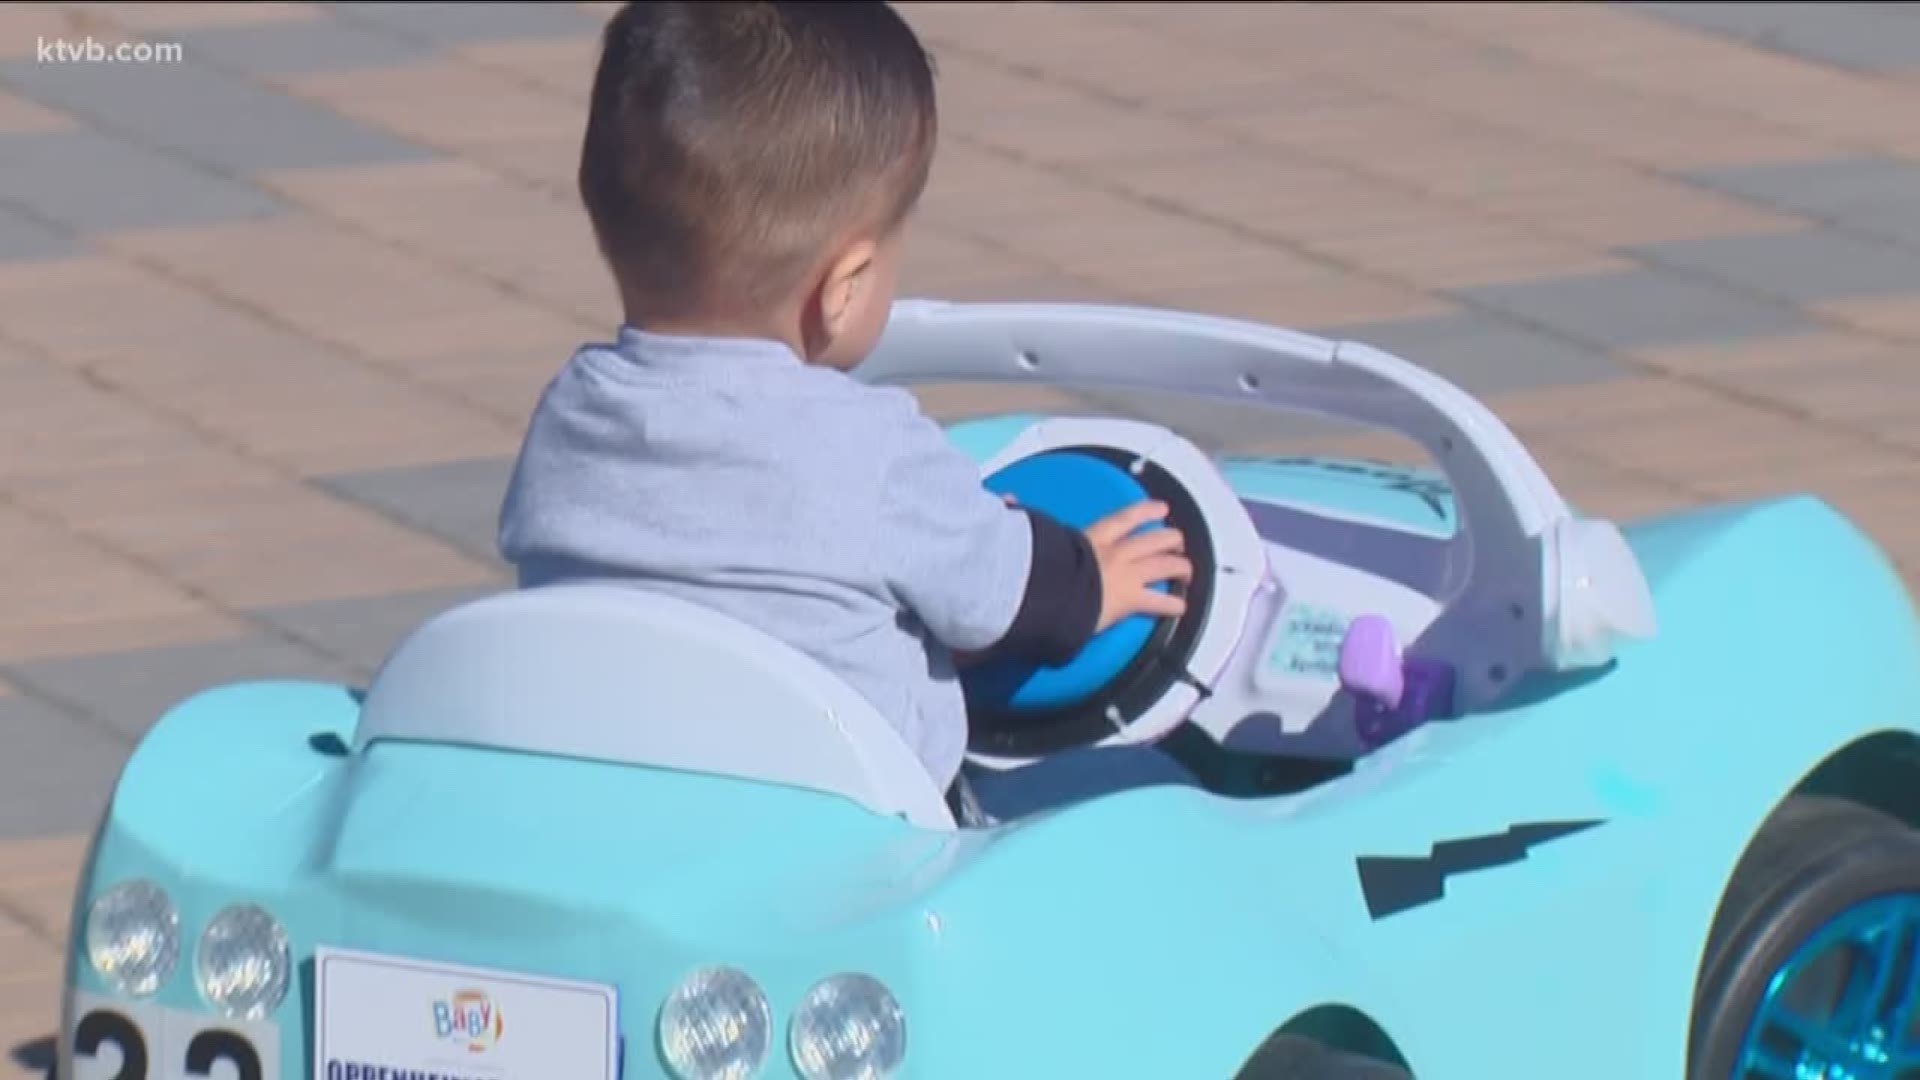 Some Boise State engineering students are helping special needs kids get mobile by building adaptive electric cars for them.